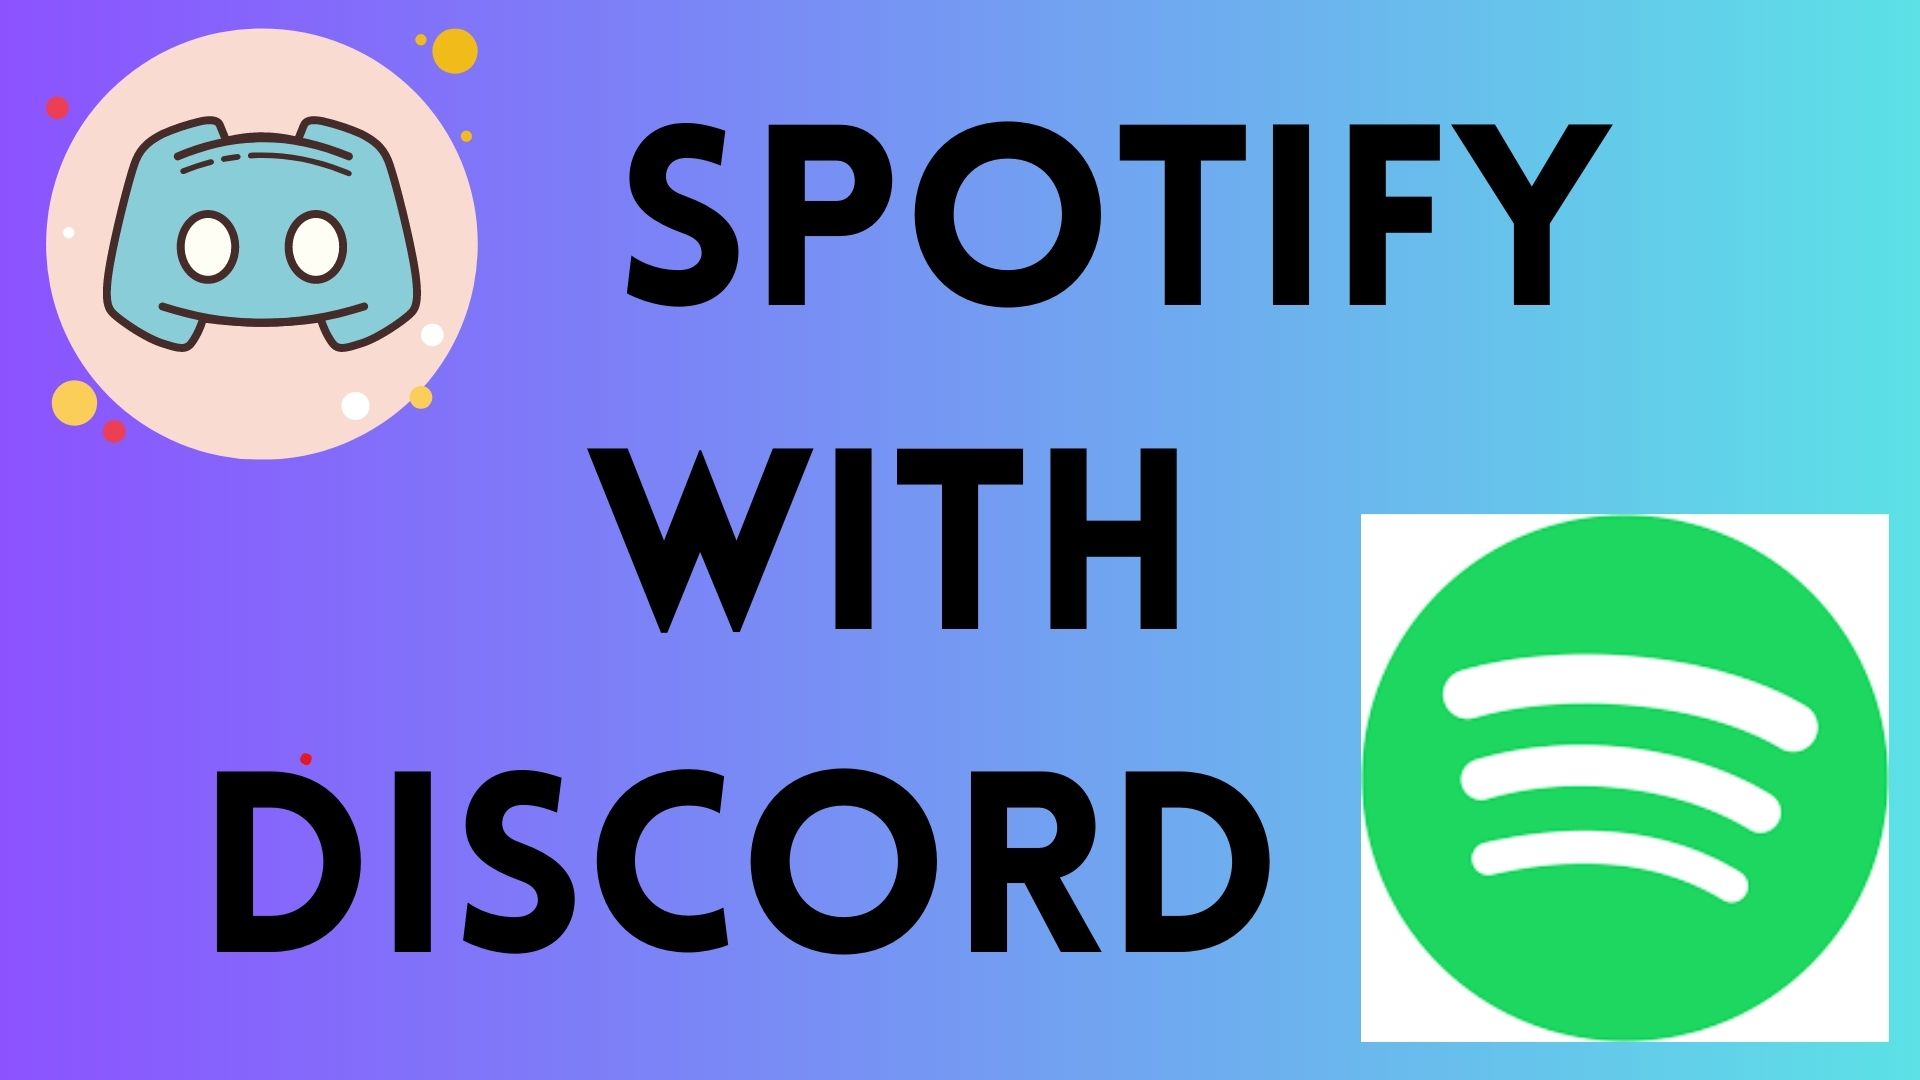 Spotify and discord